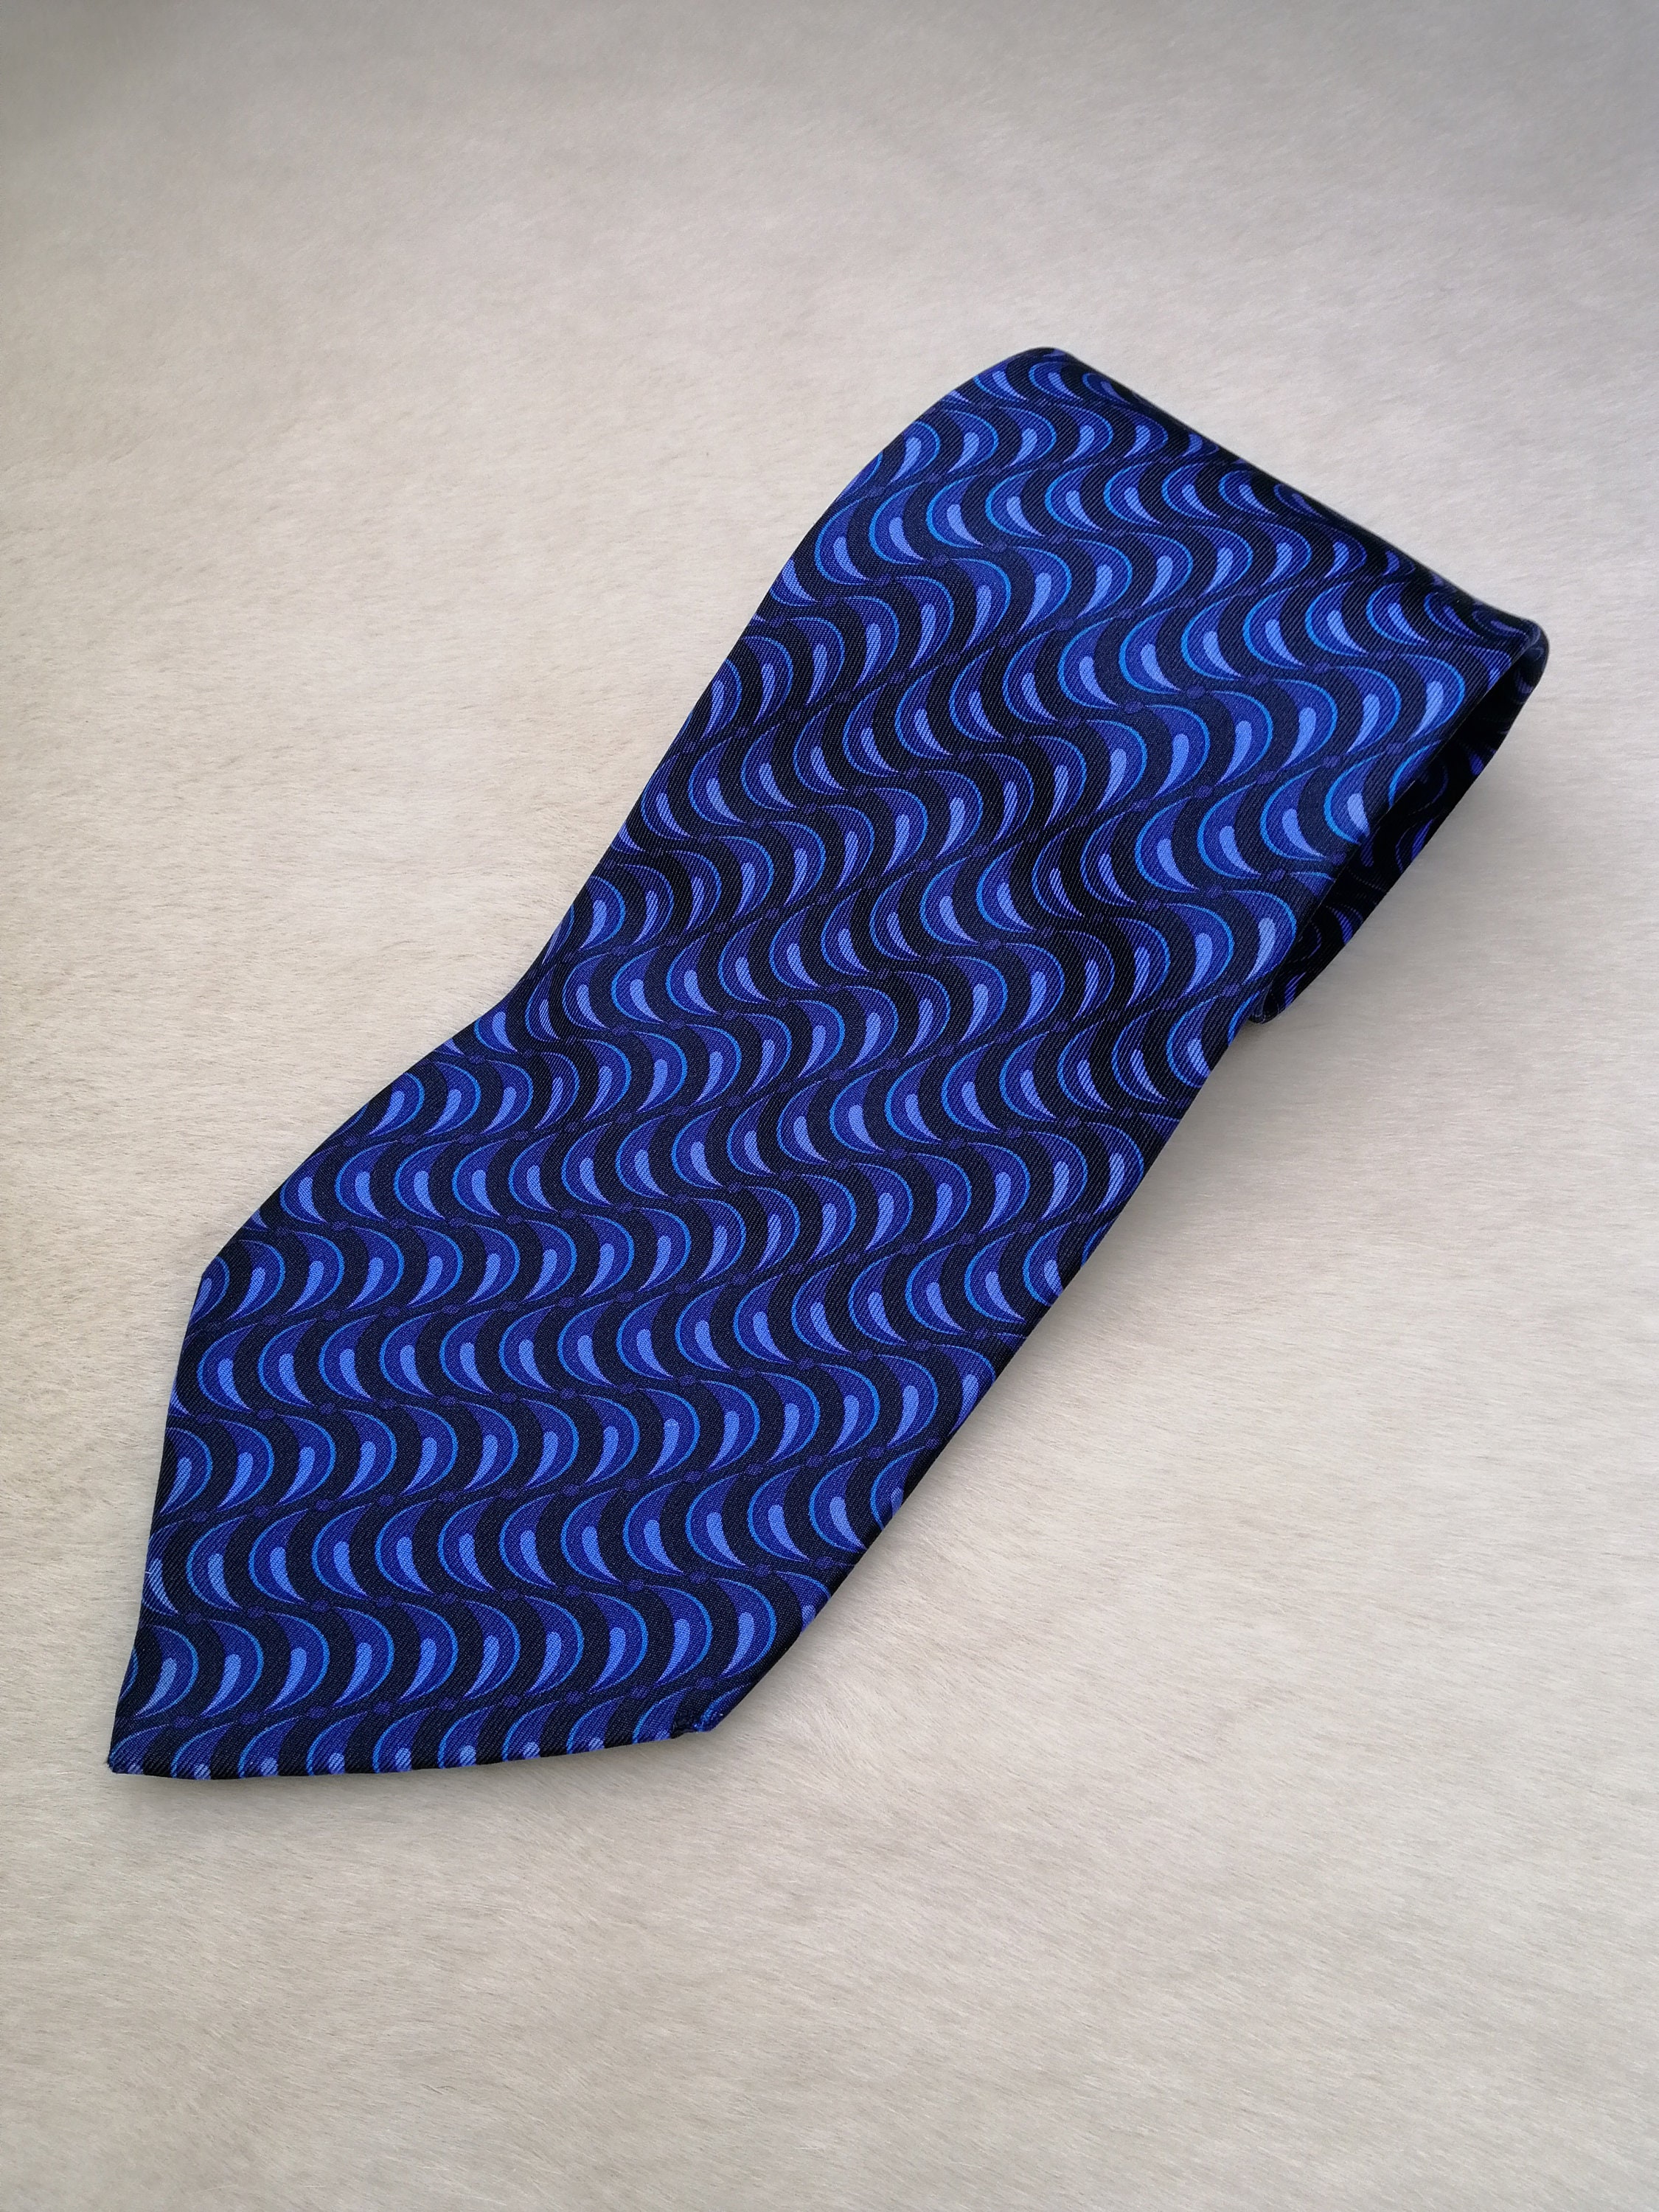 LOUIS VUITTON Neck Tie Silk Navy With Small Gold Rectangles 3.5 Wide Mens LV